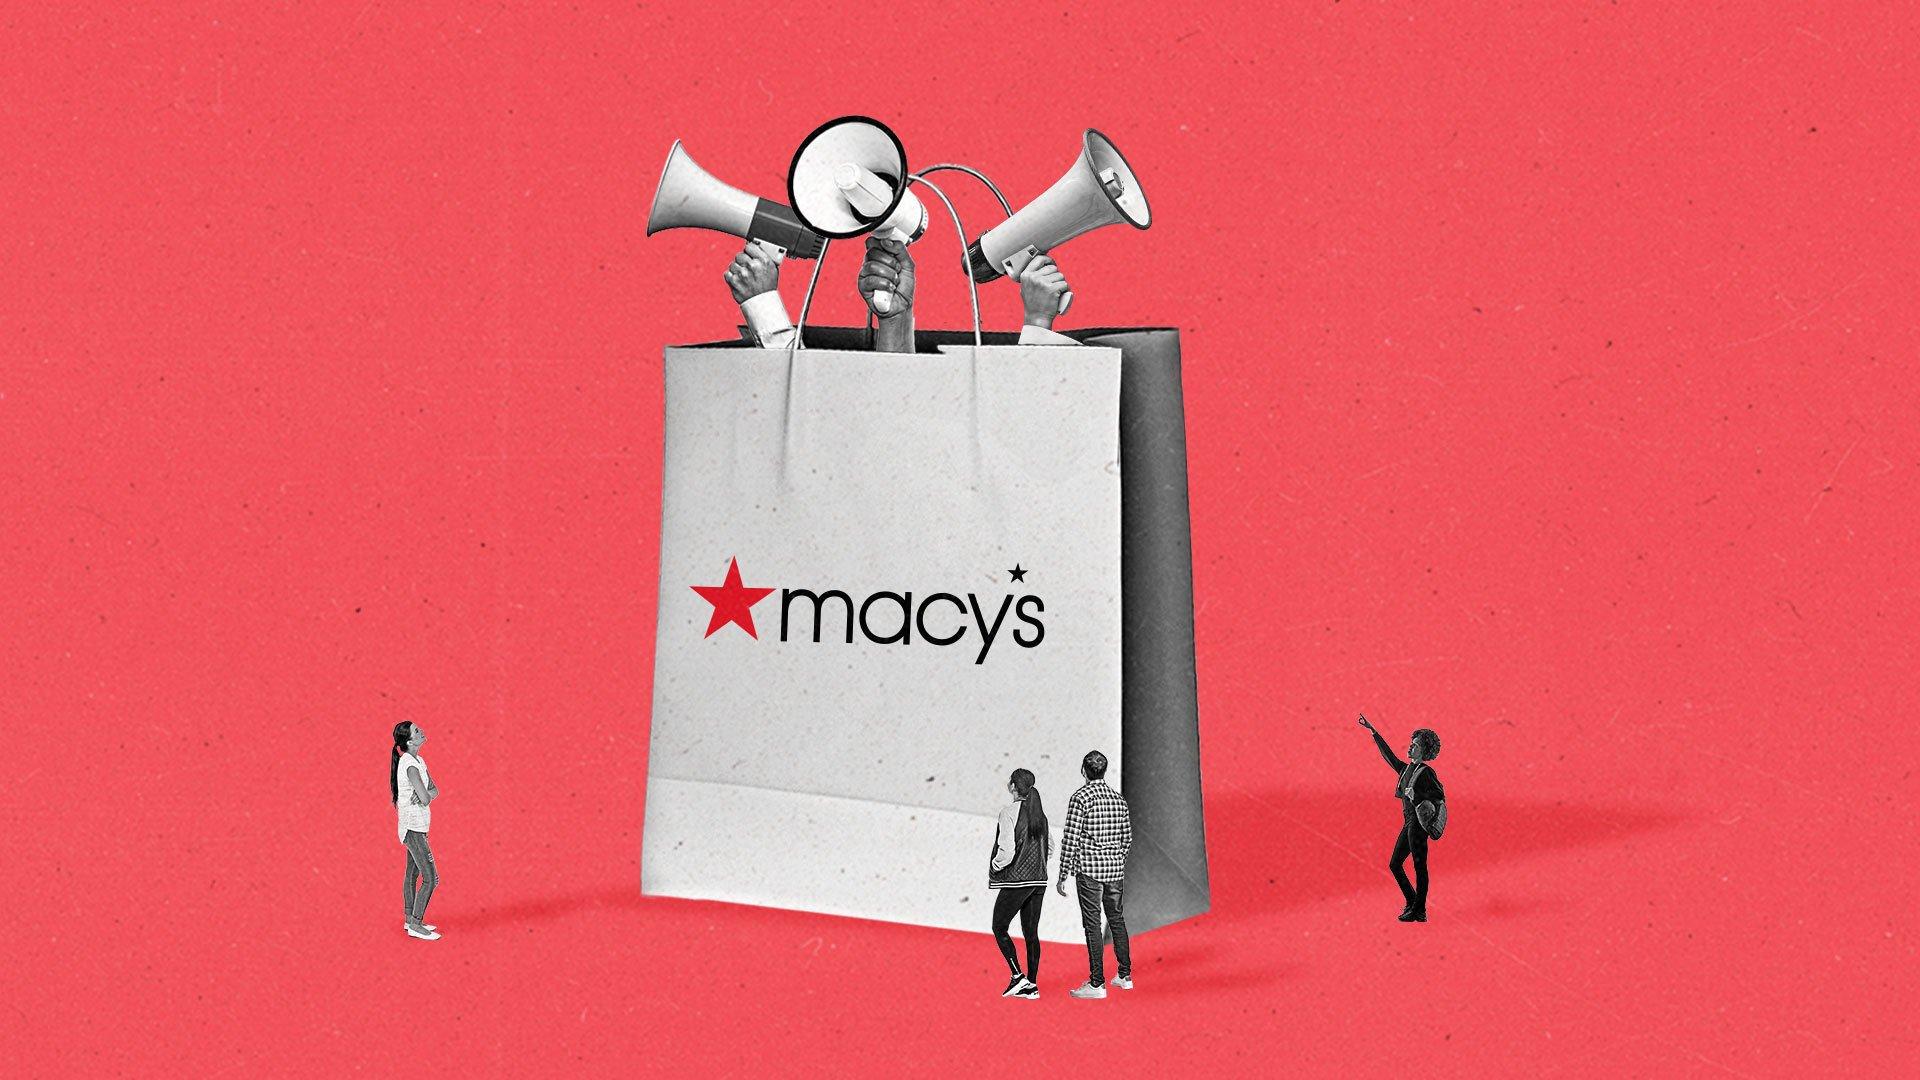 Three hands holding megaphones stick out of an oversized Macy's retail bag as people look on.